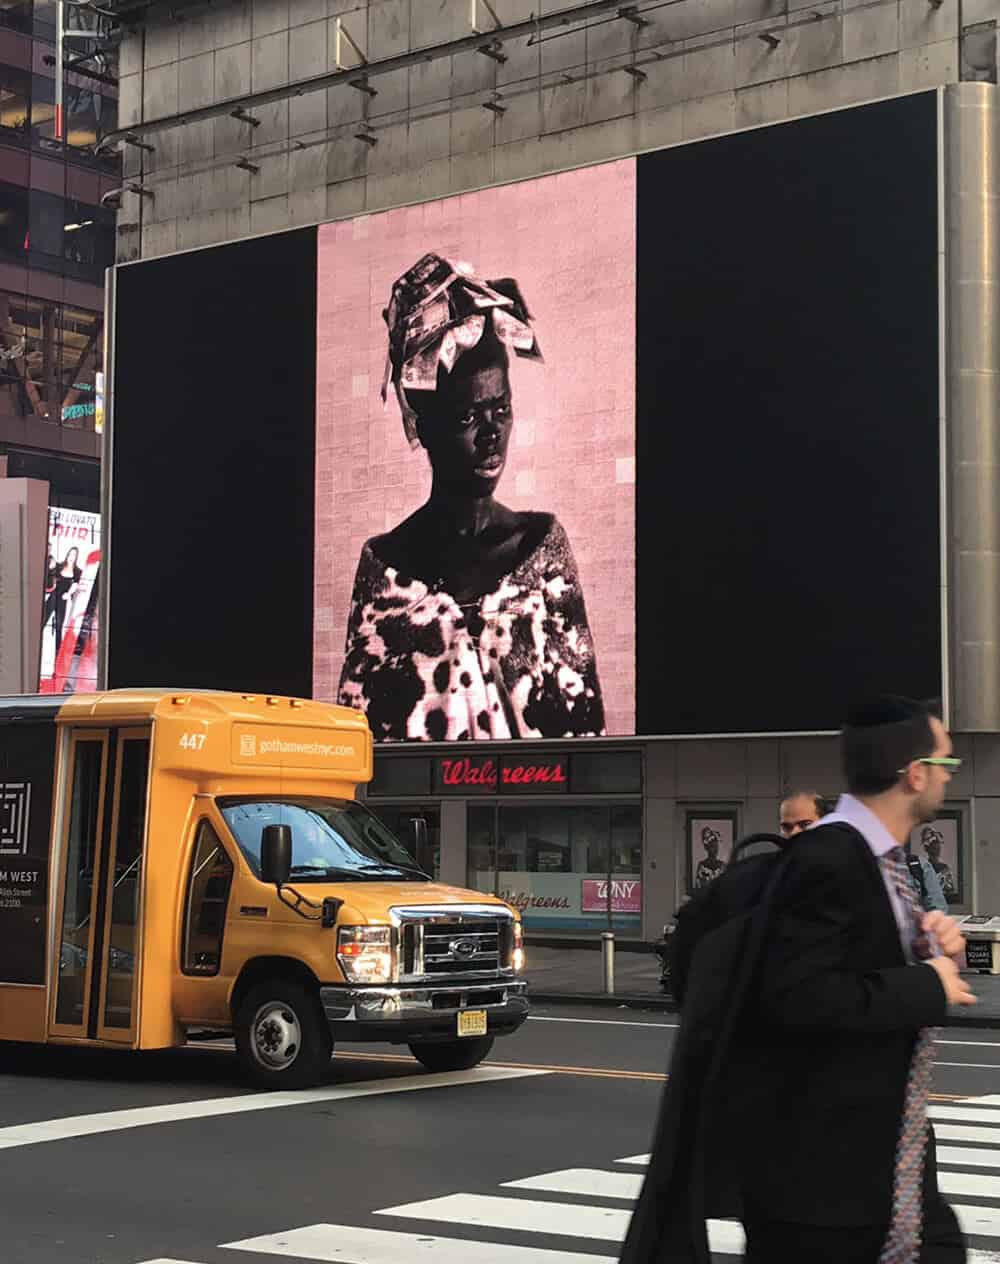 Installation shot of Zanele Muholi’s intervention in Time Square, New York City, as part of Performa 17. Courtesy of Performa.